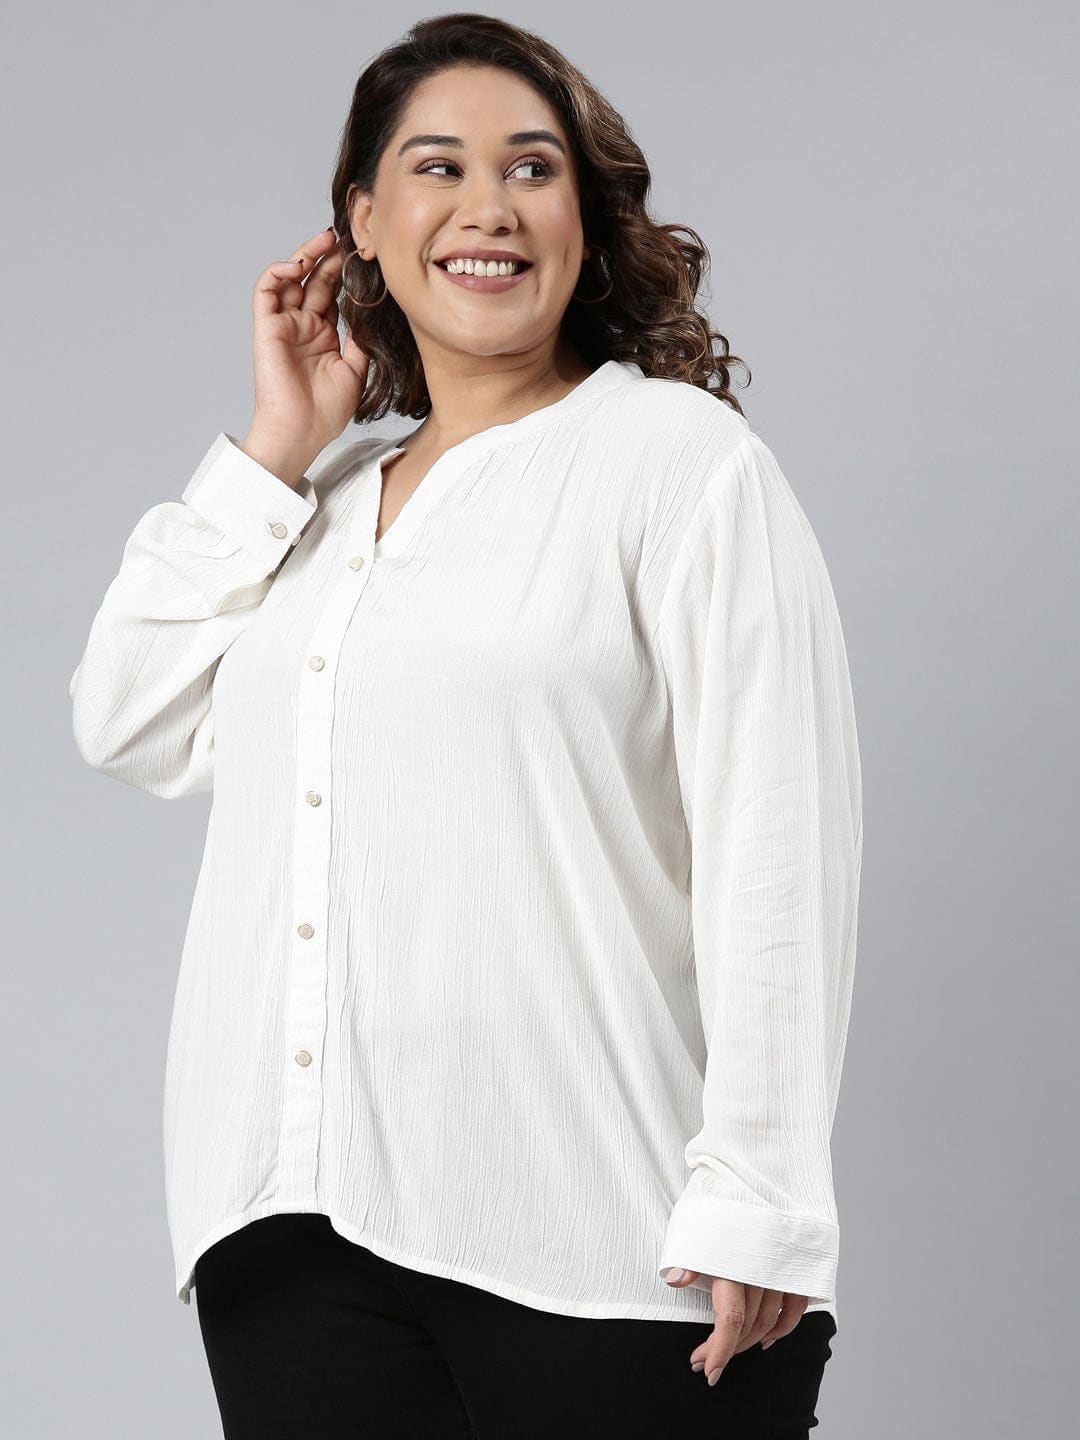 White shirt with full sleeves